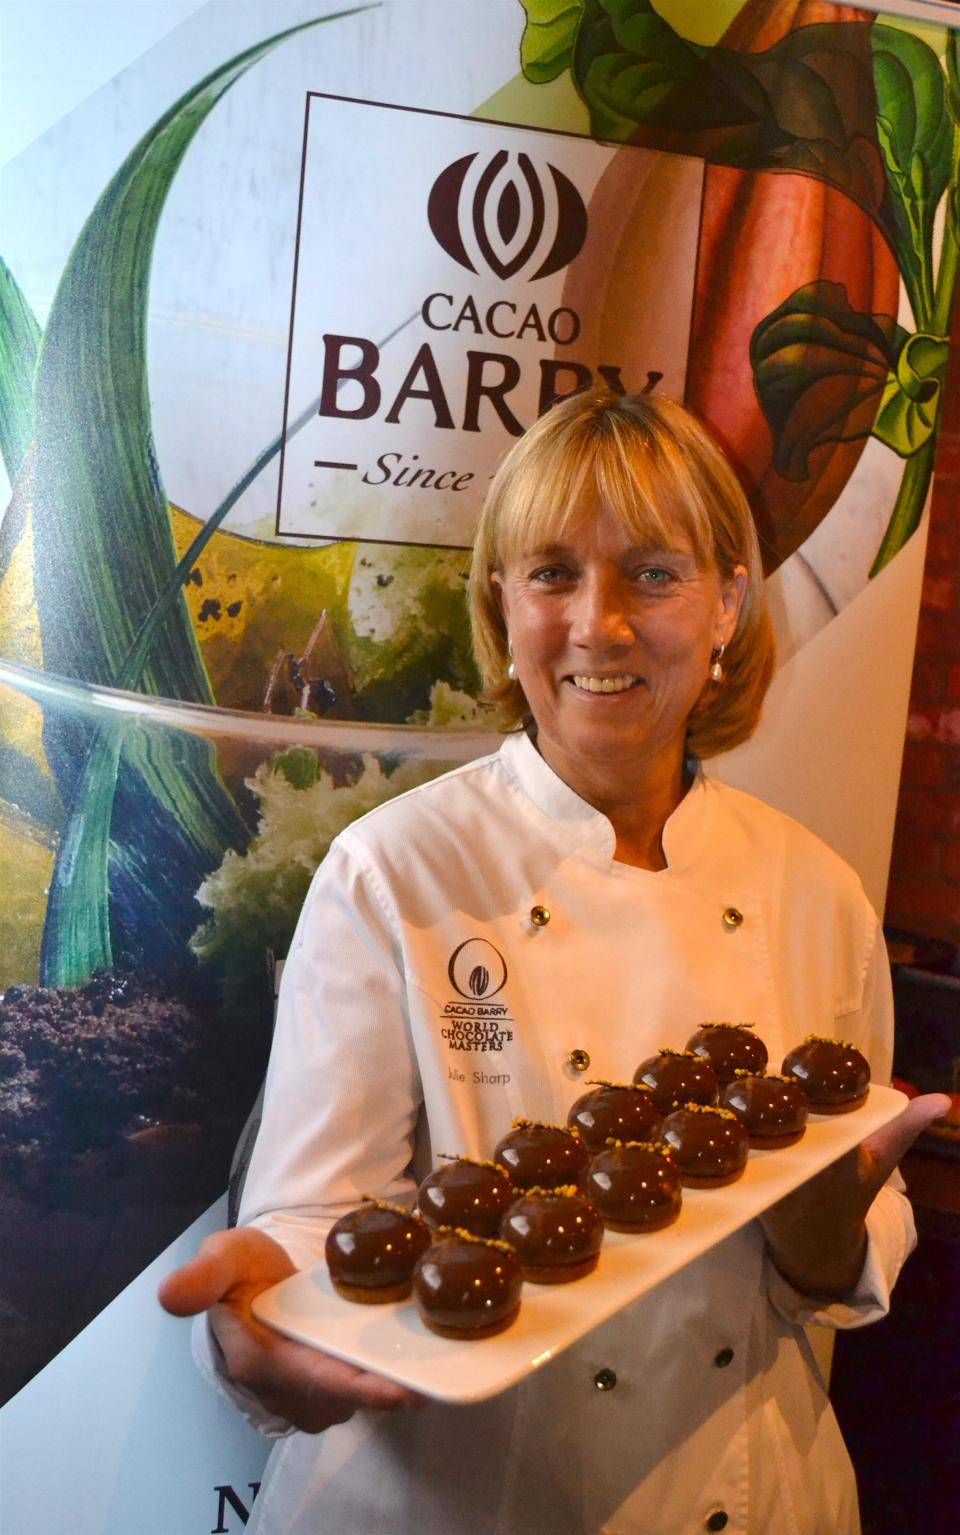 Julie Sharp created special desserts for the event